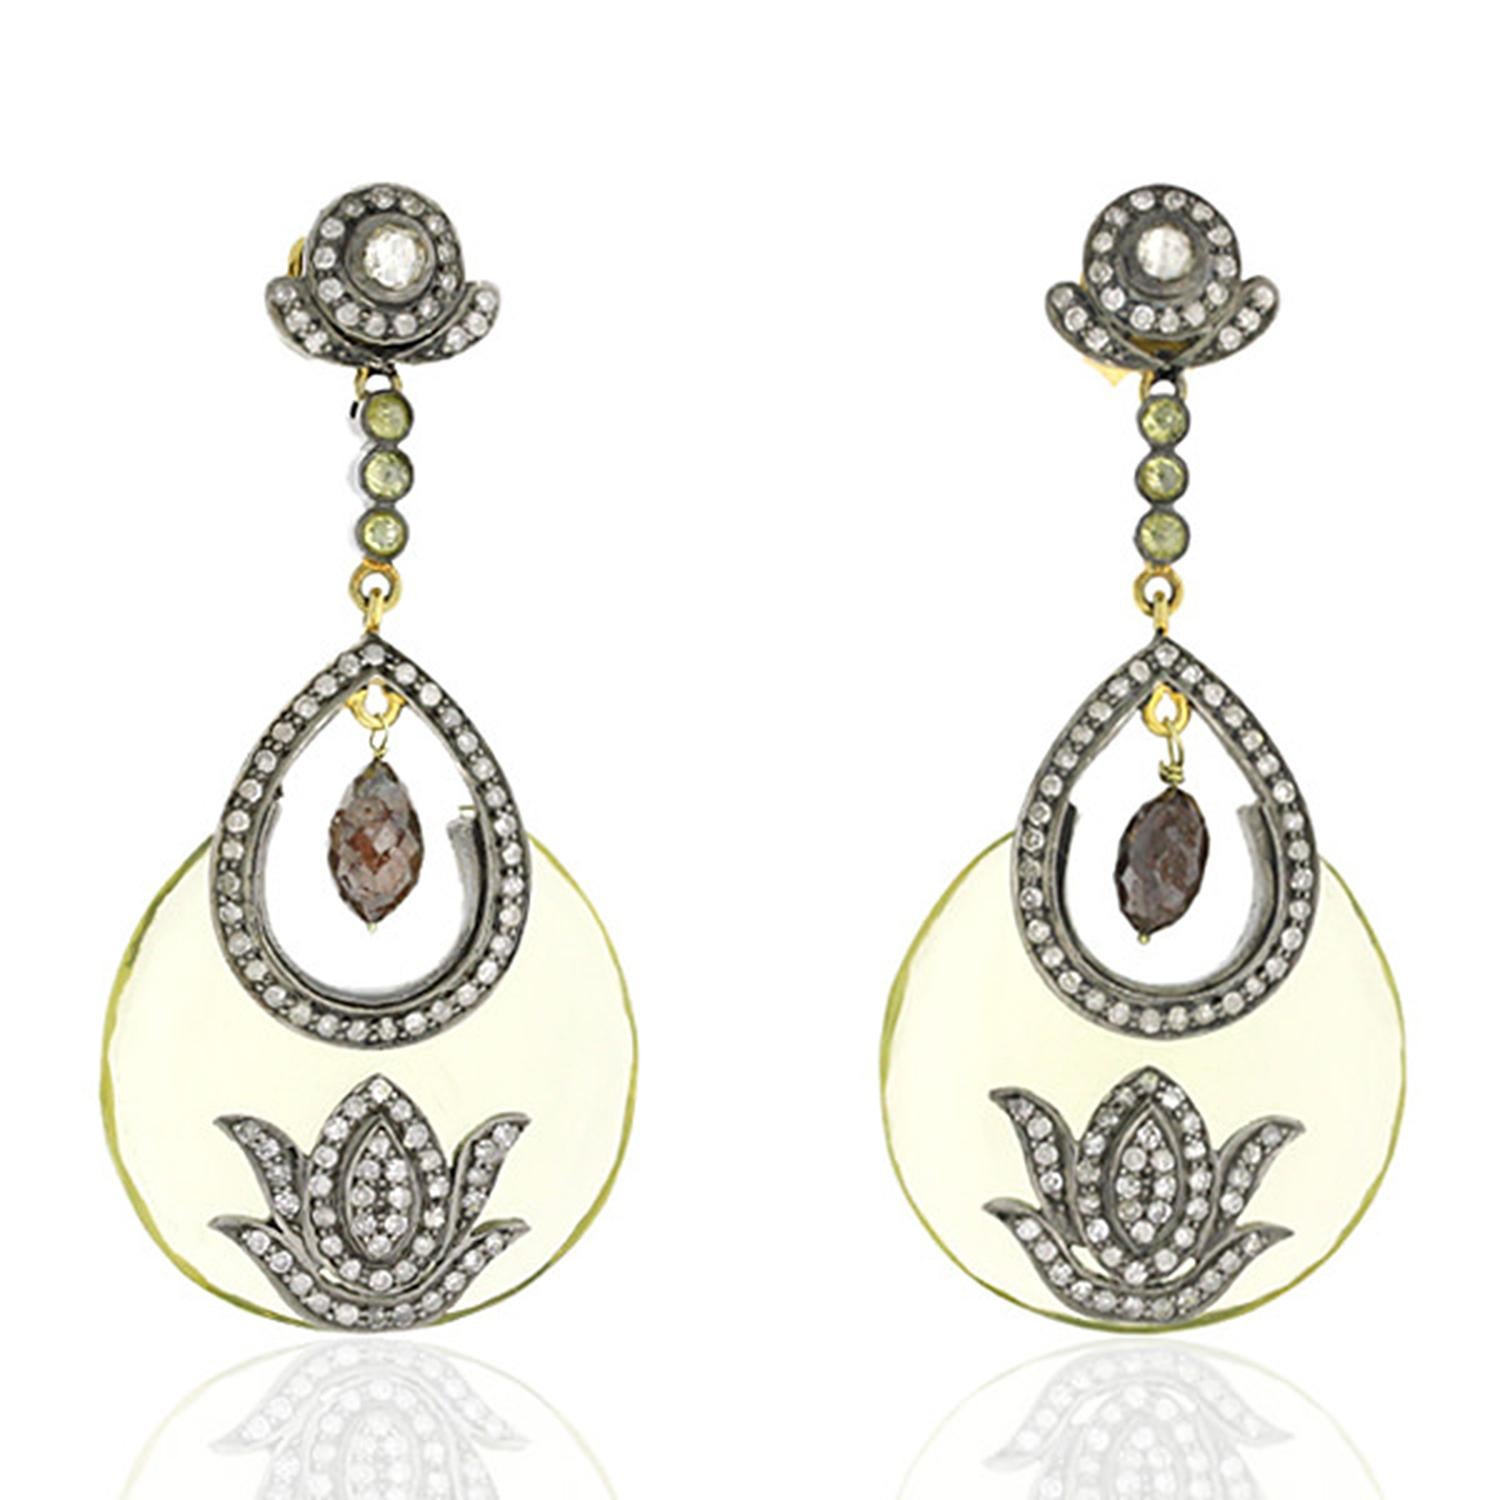 Mixed Cut Lemon Quartz Earrings with Mounted Pave Diamonds in 18k Yellow Gold & Silver For Sale